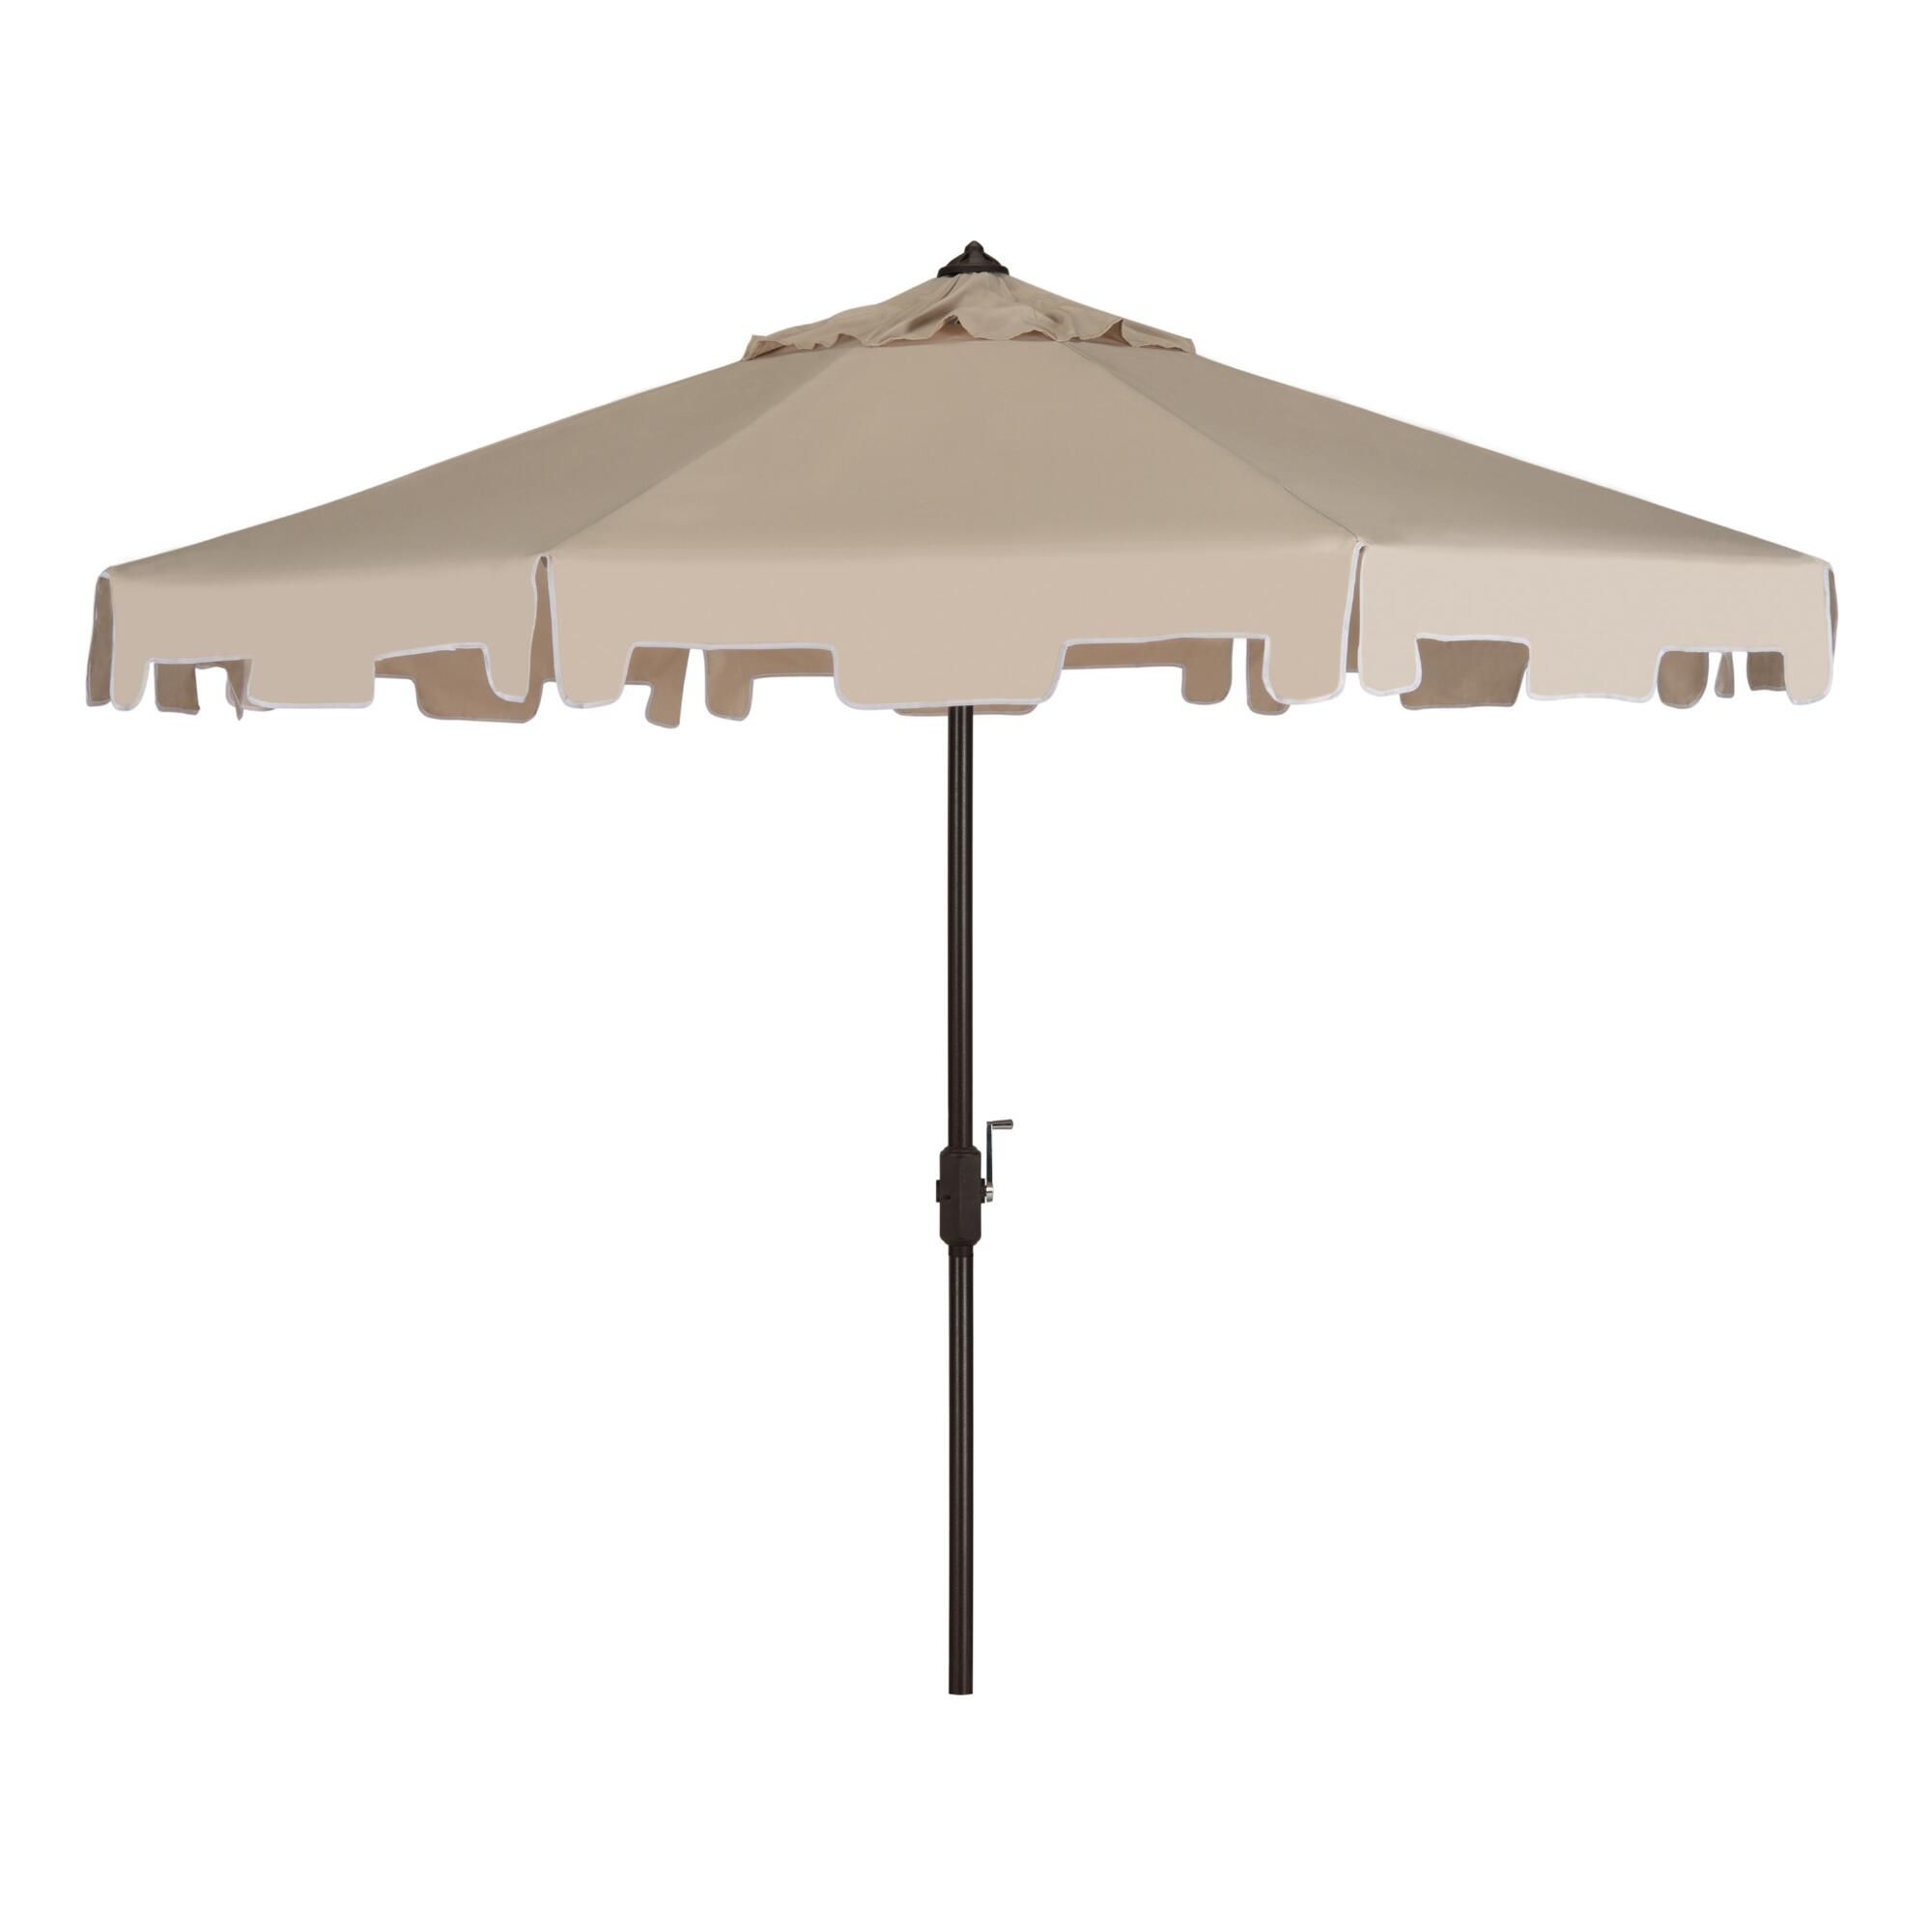 Beige and White Square Scallop 9 Ft Tilting Outdoor Patio Umbrella: Natural - Fabric by World Market | World Market